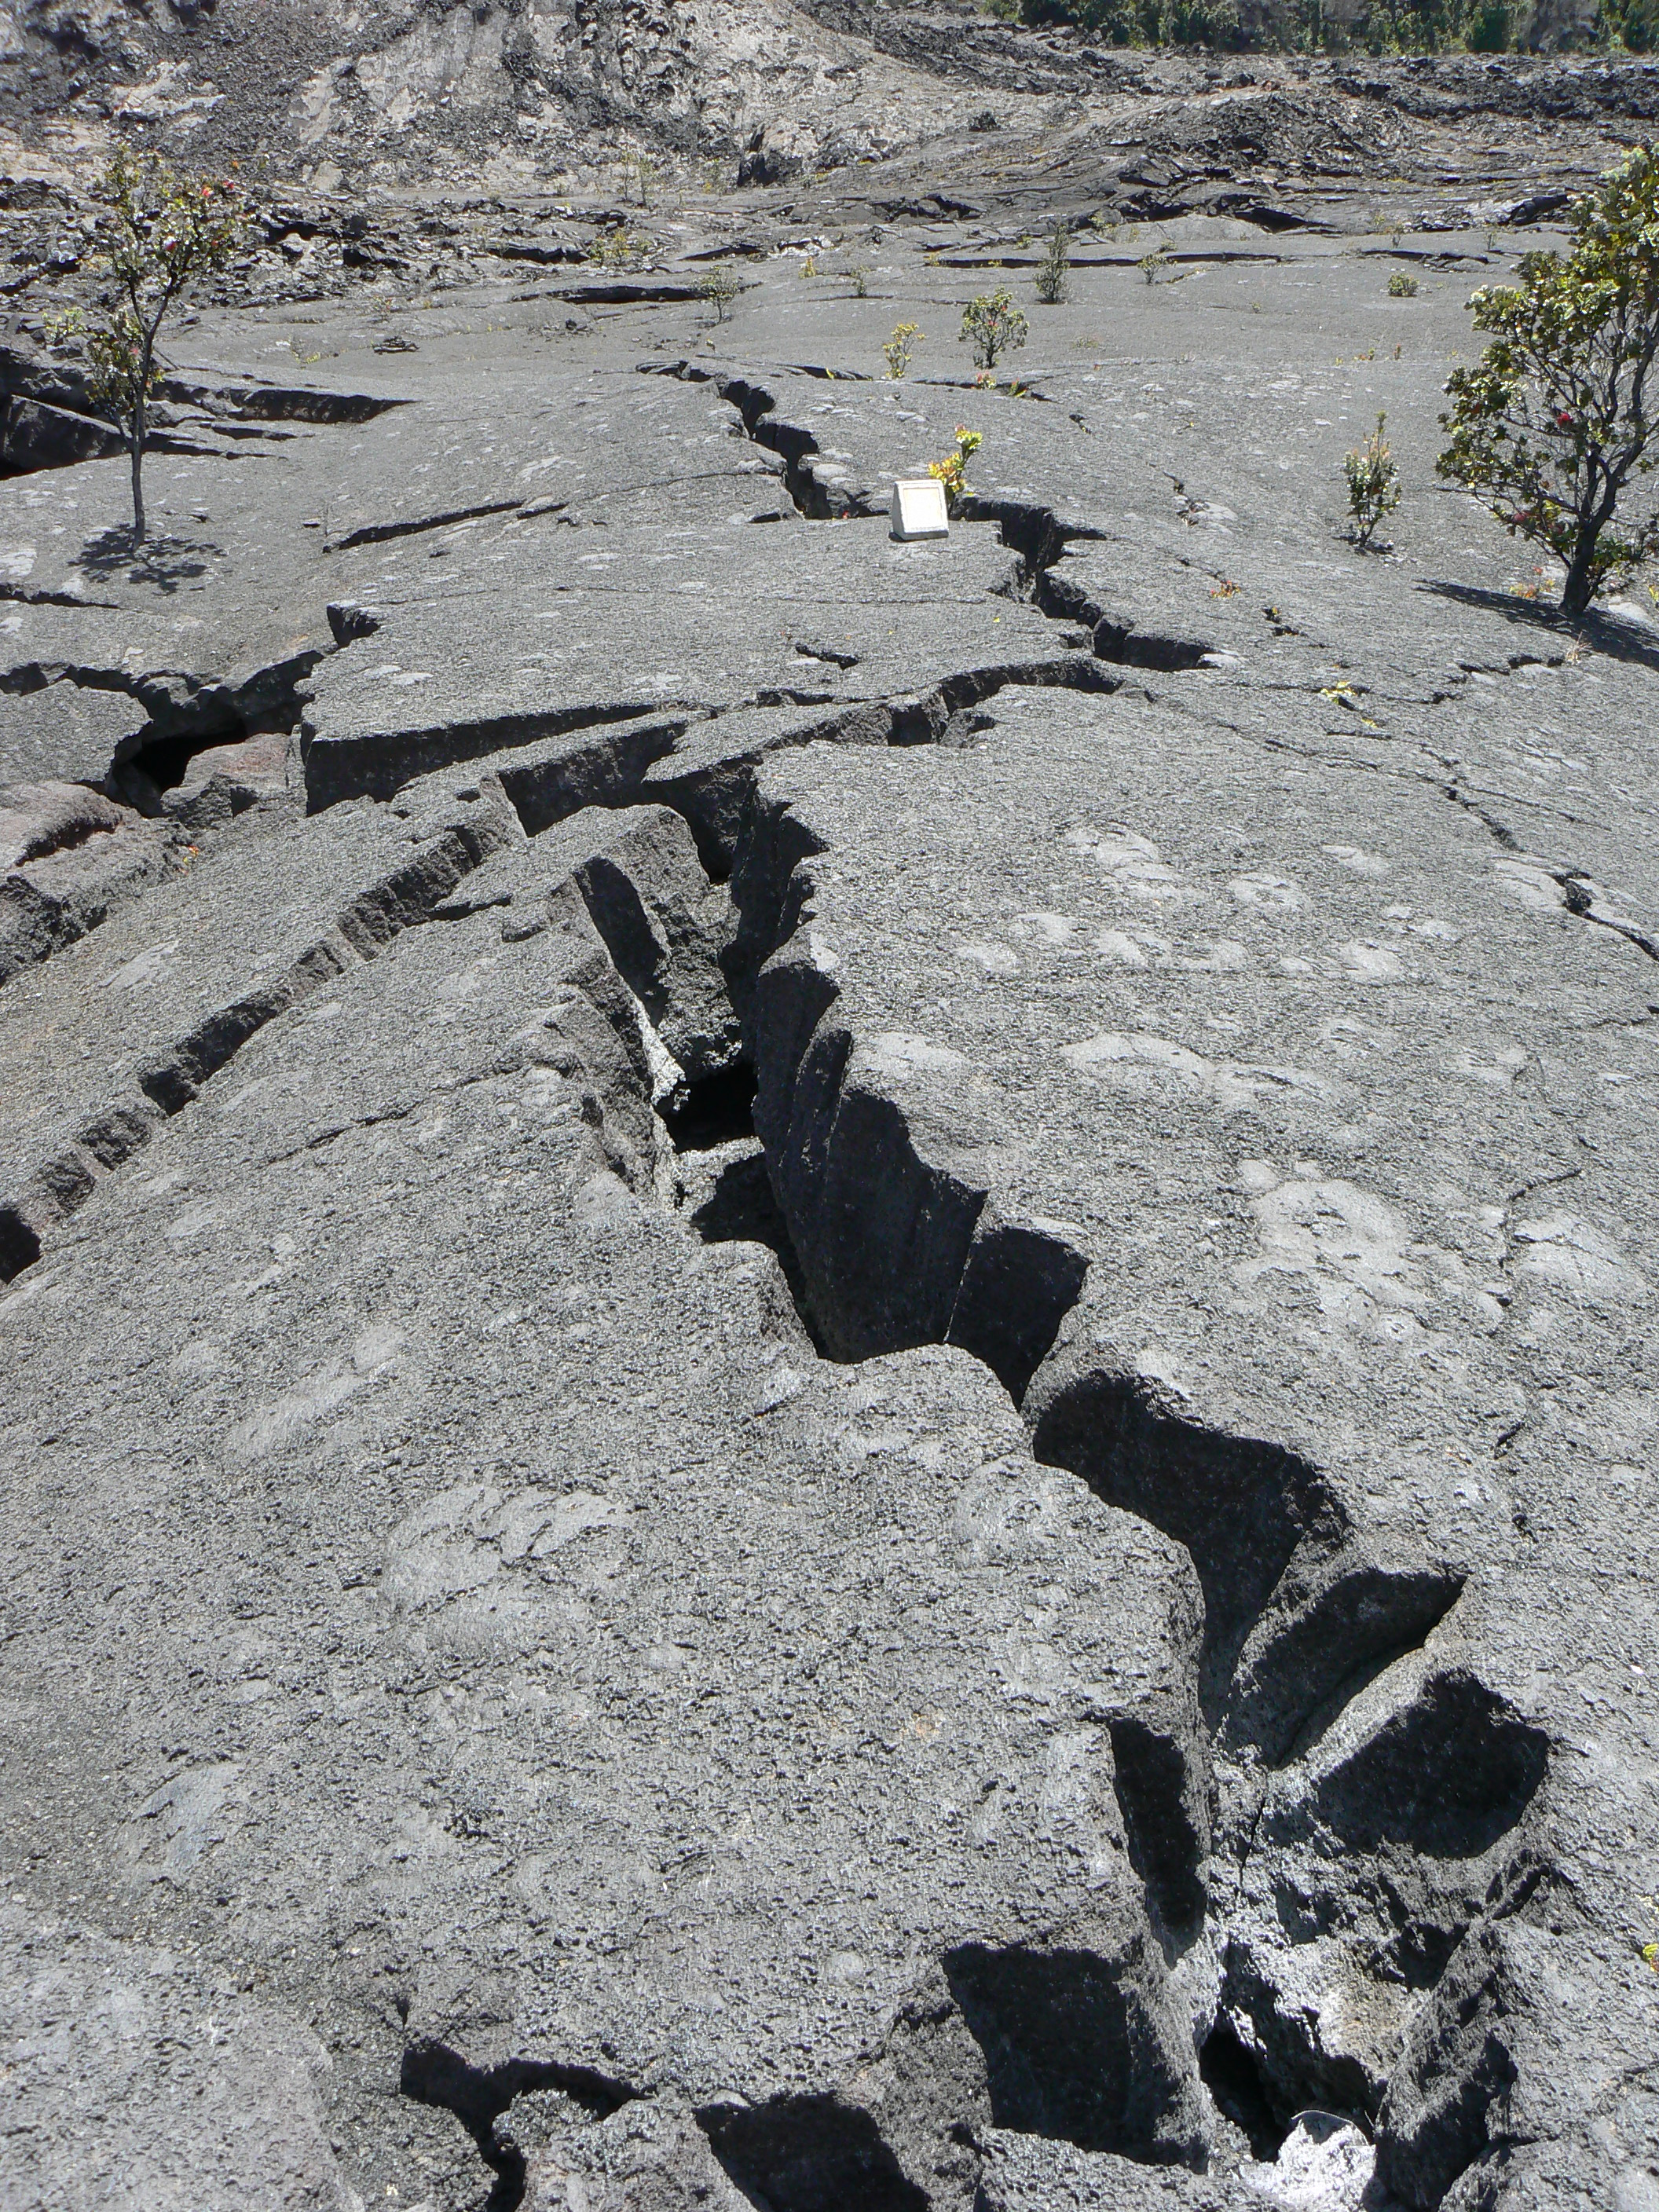 File:Cracked lava surface of Iki Crater.JPG - Wikimedia Commons